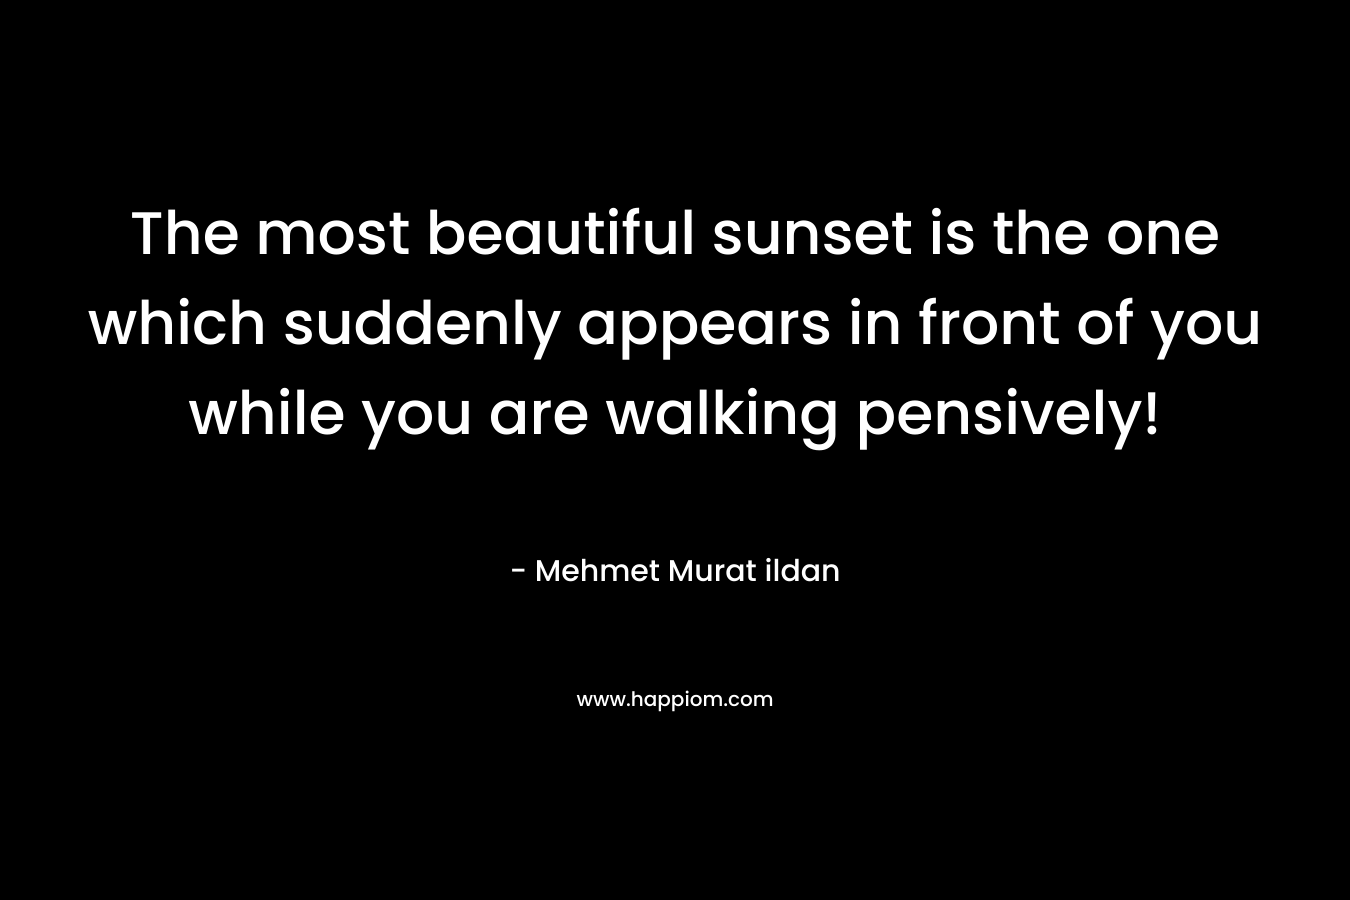 The most beautiful sunset is the one which suddenly appears in front of you while you are walking pensively!